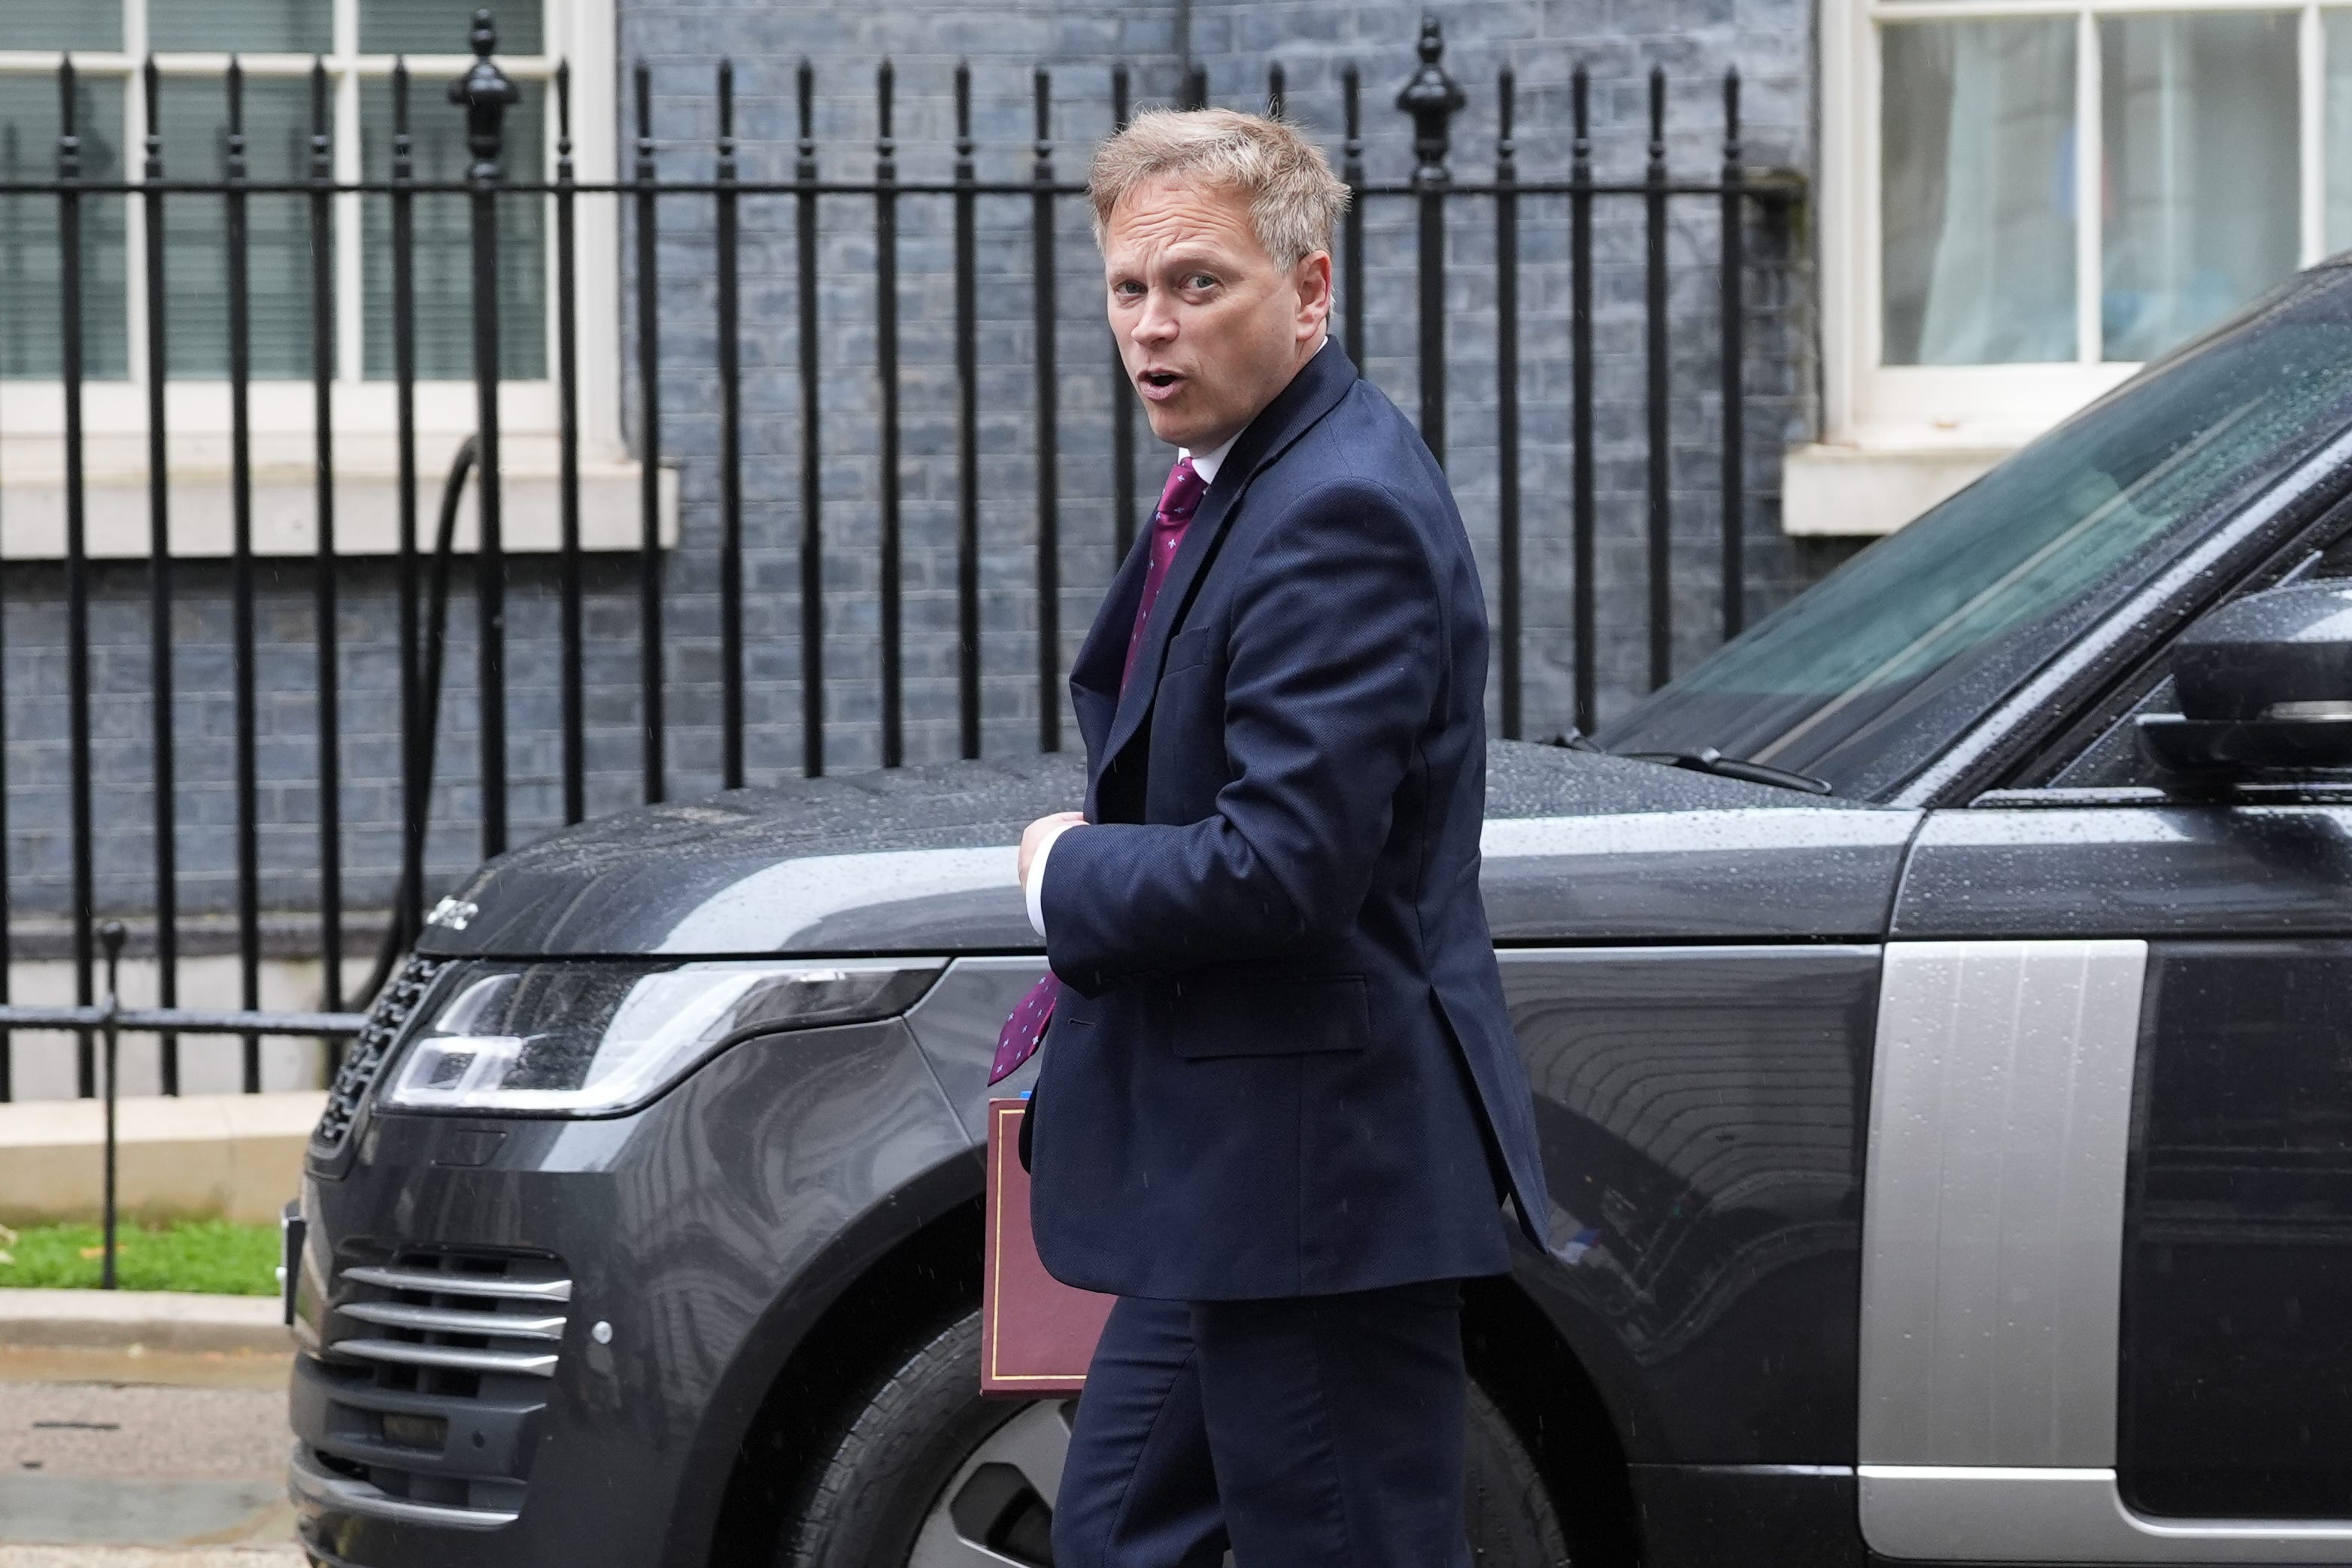 nigel farage, polls, general election, politics, rishi sunak, sir keir starmer, reform uk, labour, general election latest: grant shapps says tory victory ‘unlikely’ as farage to launch reform manifesto